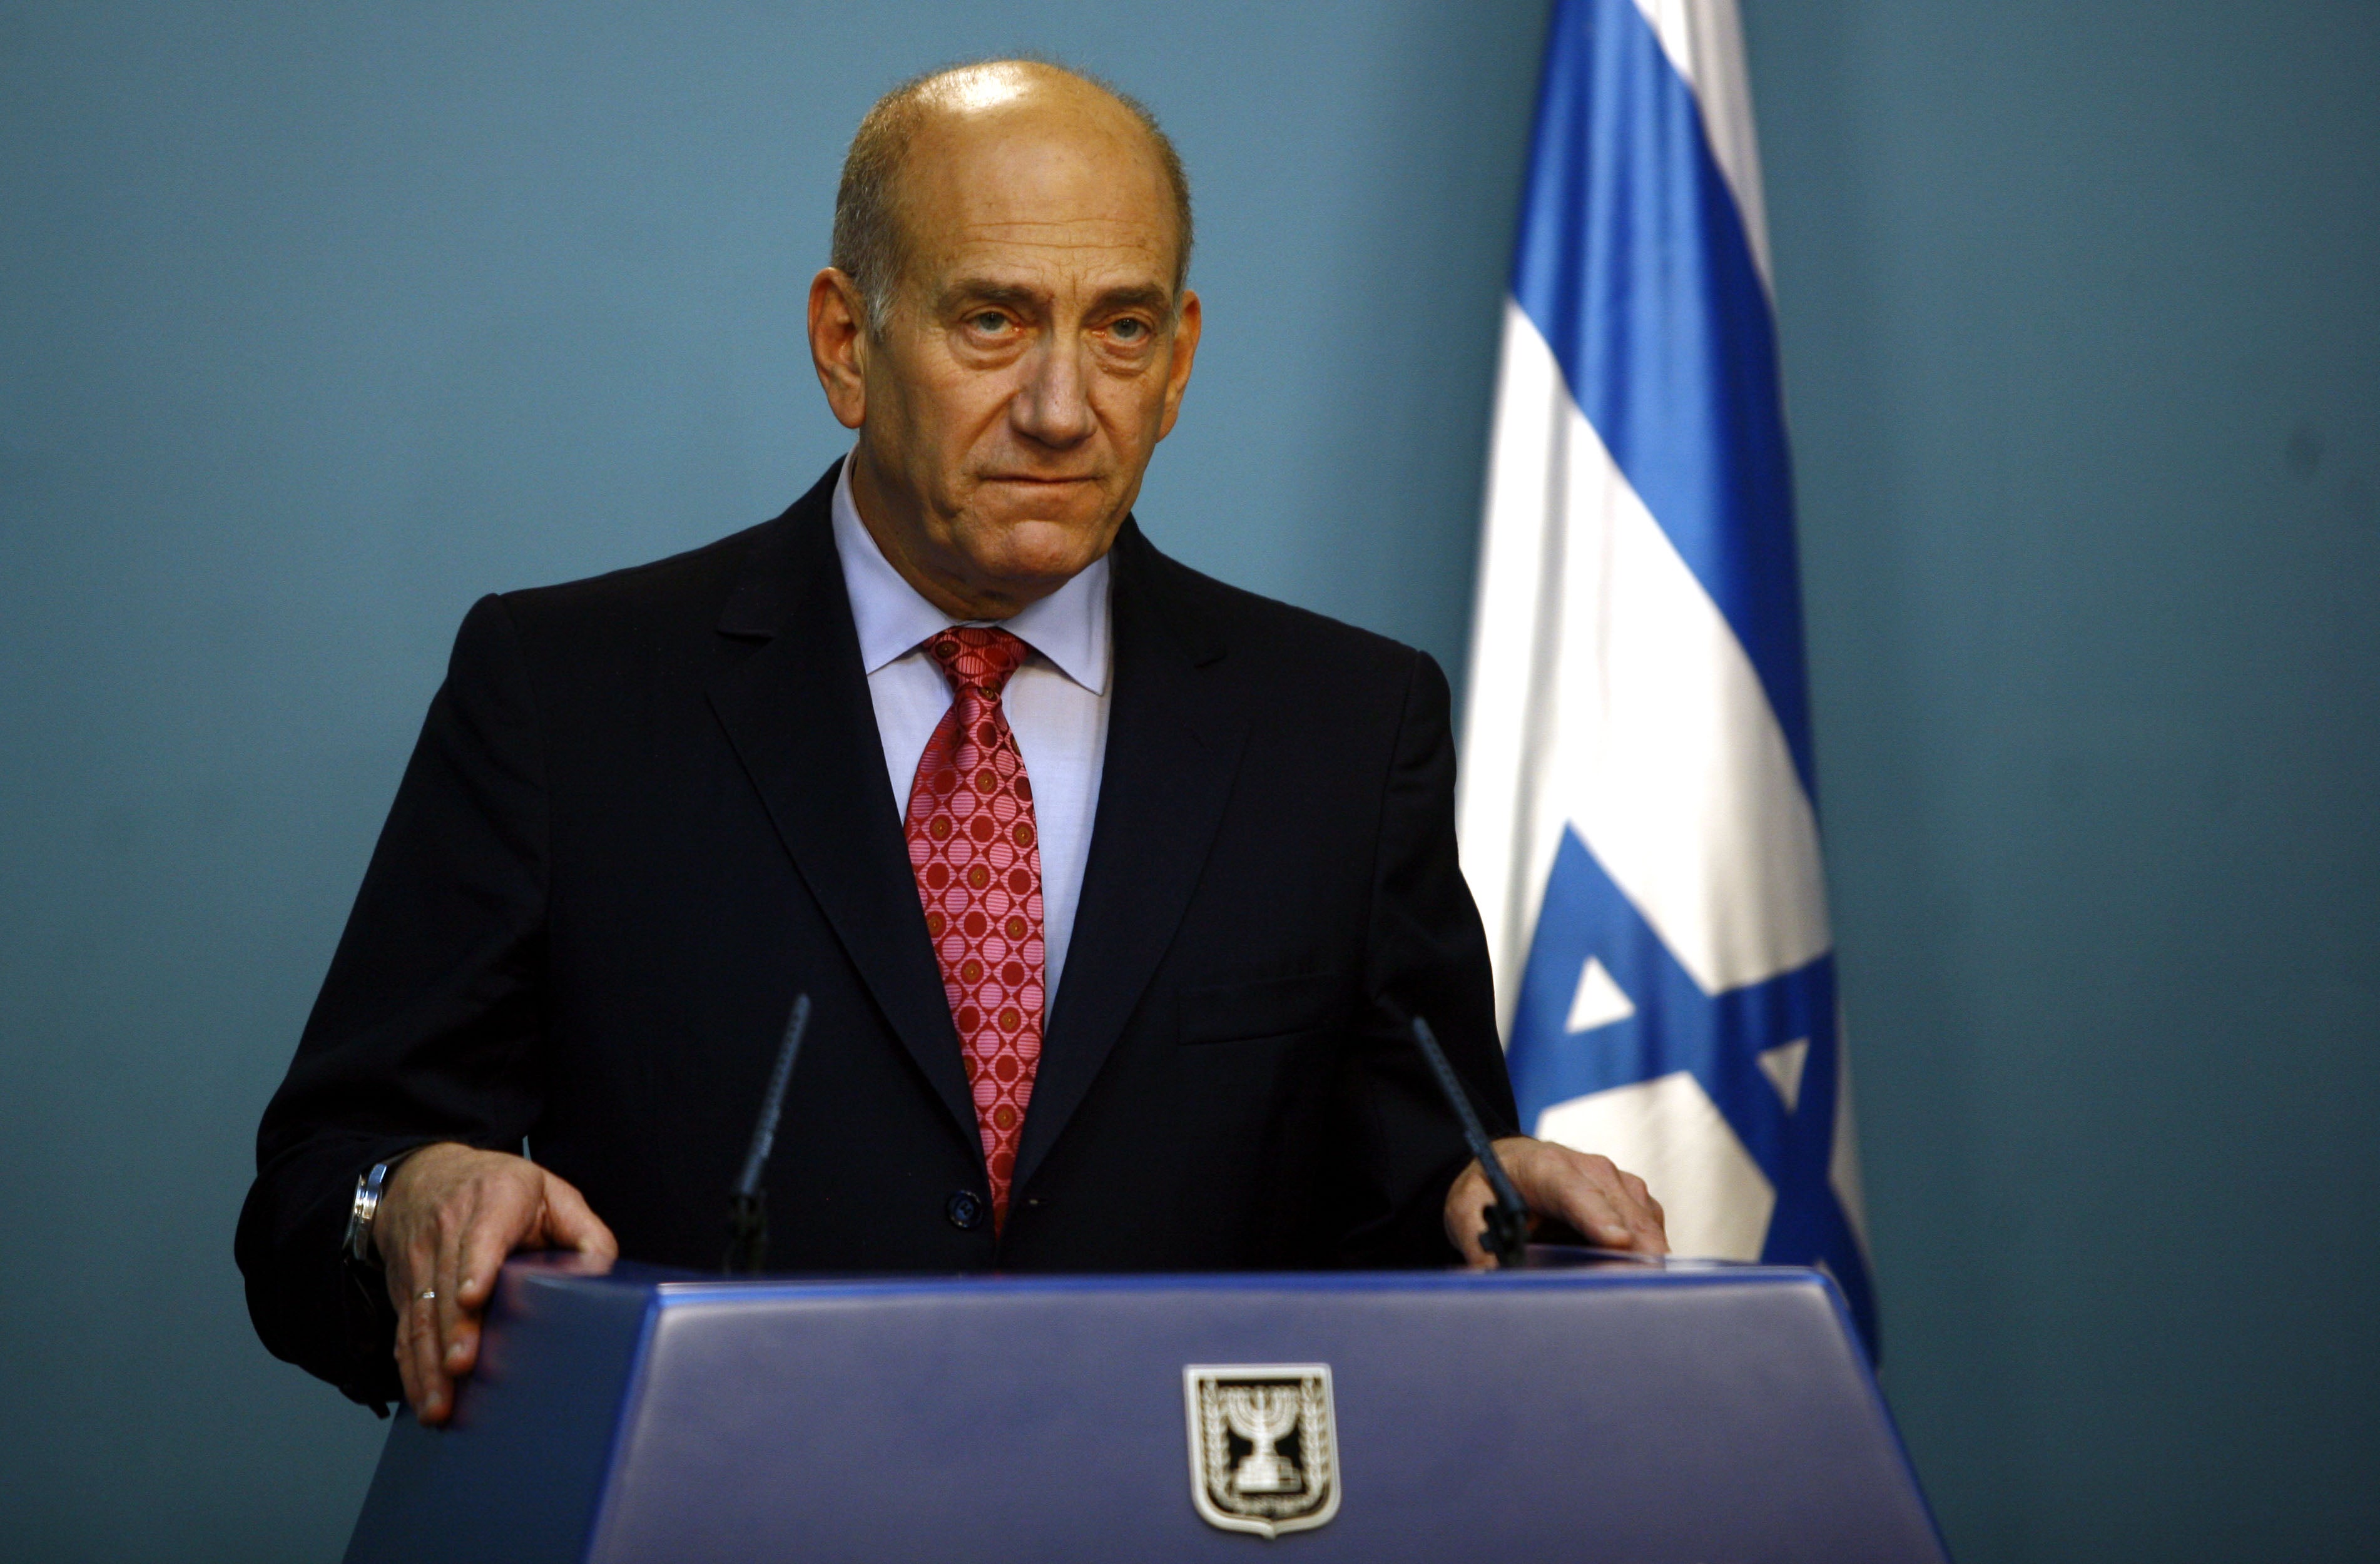 Former Israeli prime minister Ehud Olmert at a press conference while in office in 2009